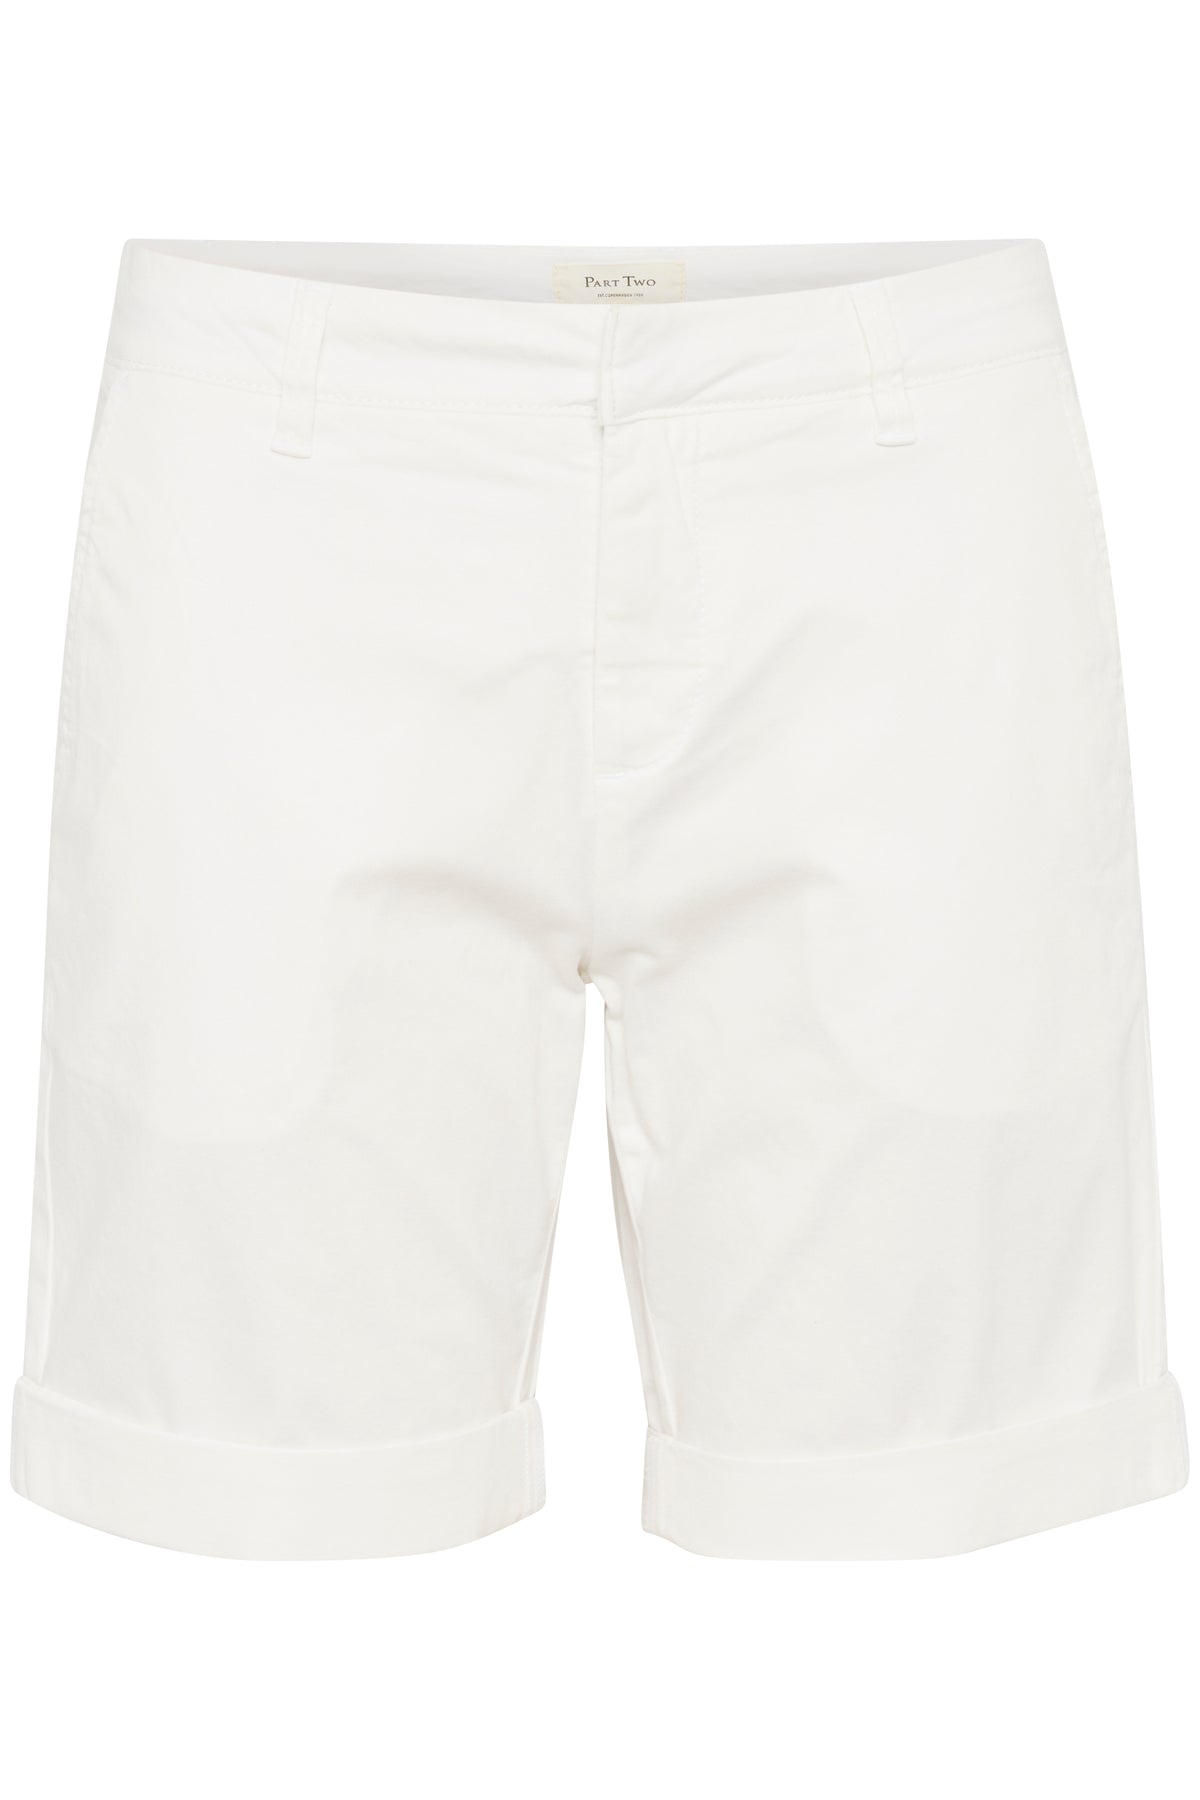 30308683 BRIGHT WHITE Short style chino tissé Part Two